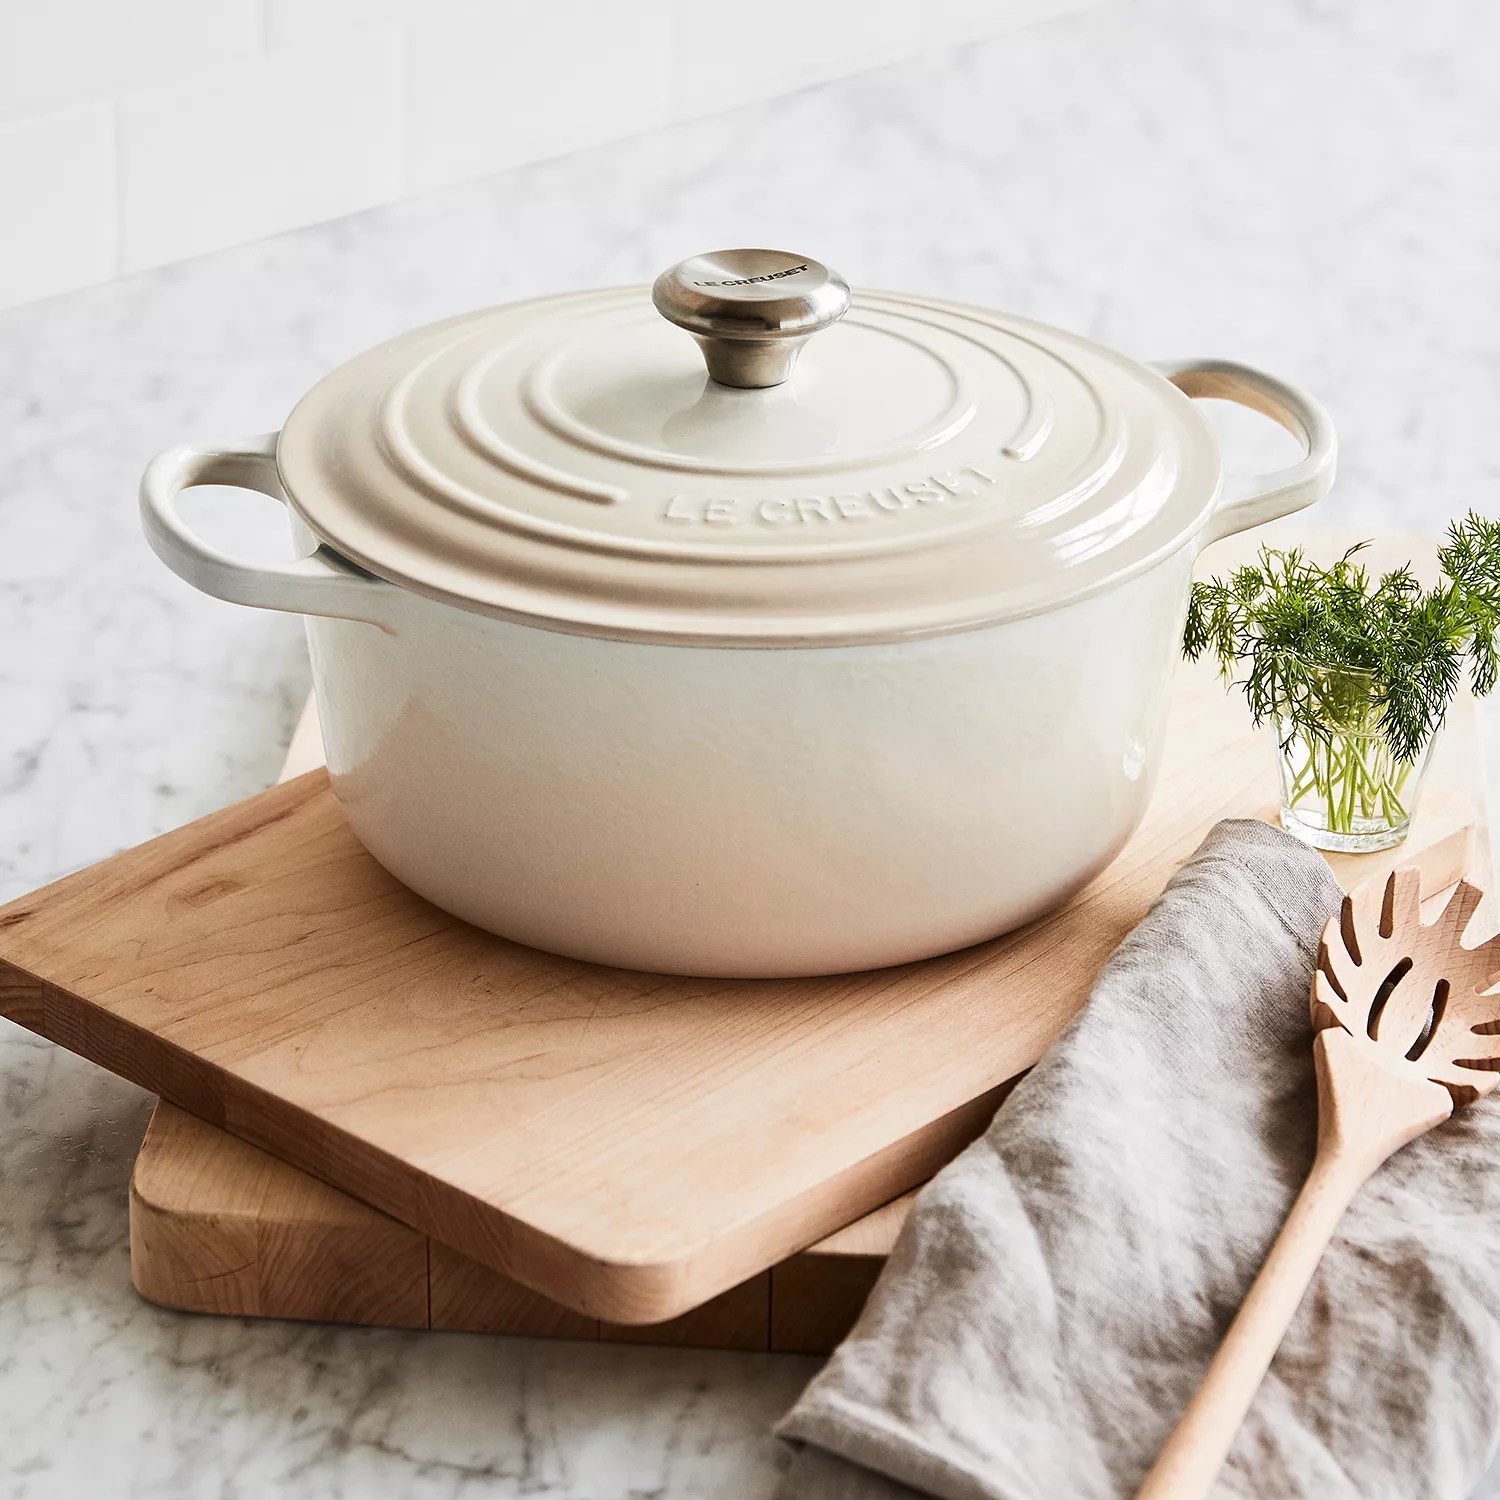 Black Friday steal: Save $150 on this GreenPan ceramic cookware